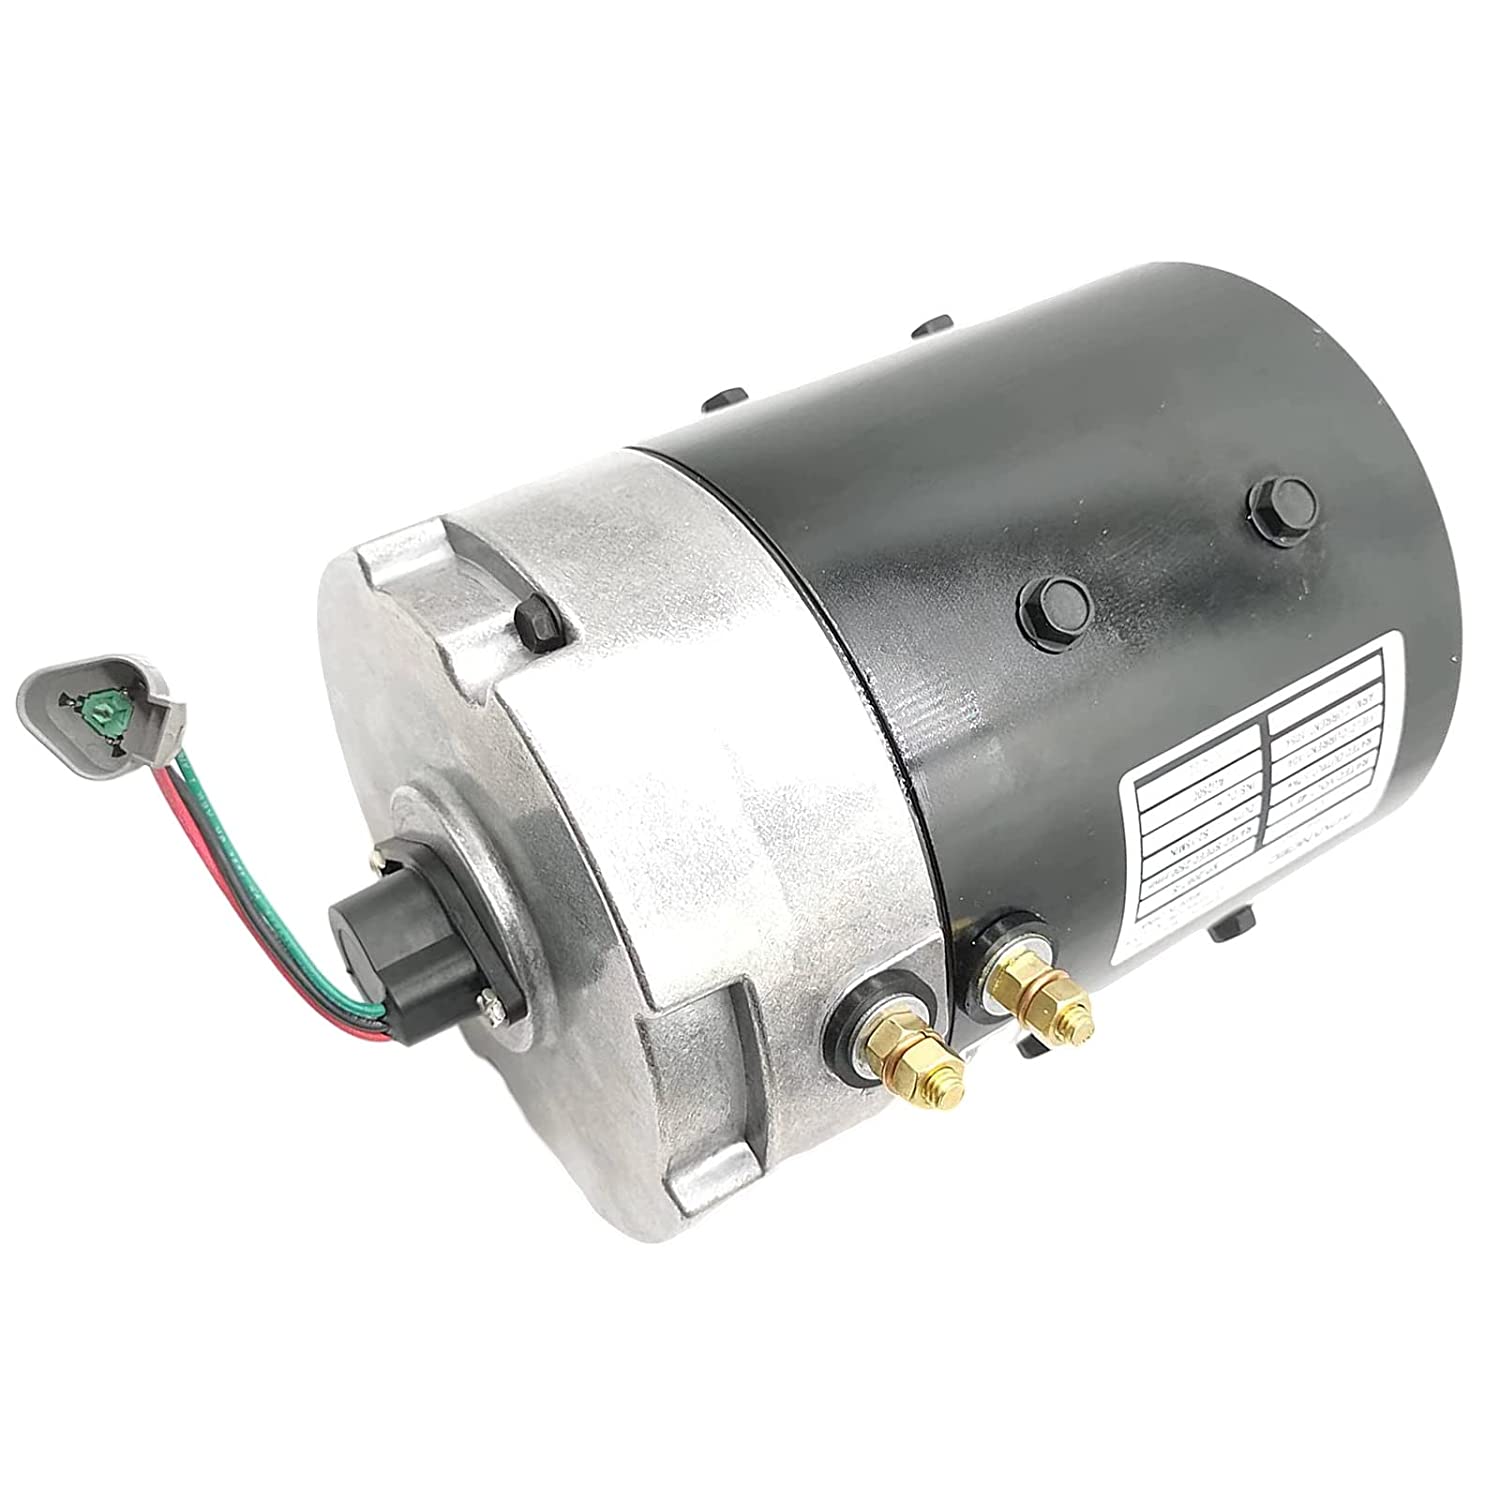 Seapple 48V DC XP-2067-S Electric Drive Motor Compatible with SepEx Motor ZQS48-3.7-T-GN 103572501 1035725-01 102240102 3.7 kW Electric Vehicle Club Car Golf Cart - image 1 of 6